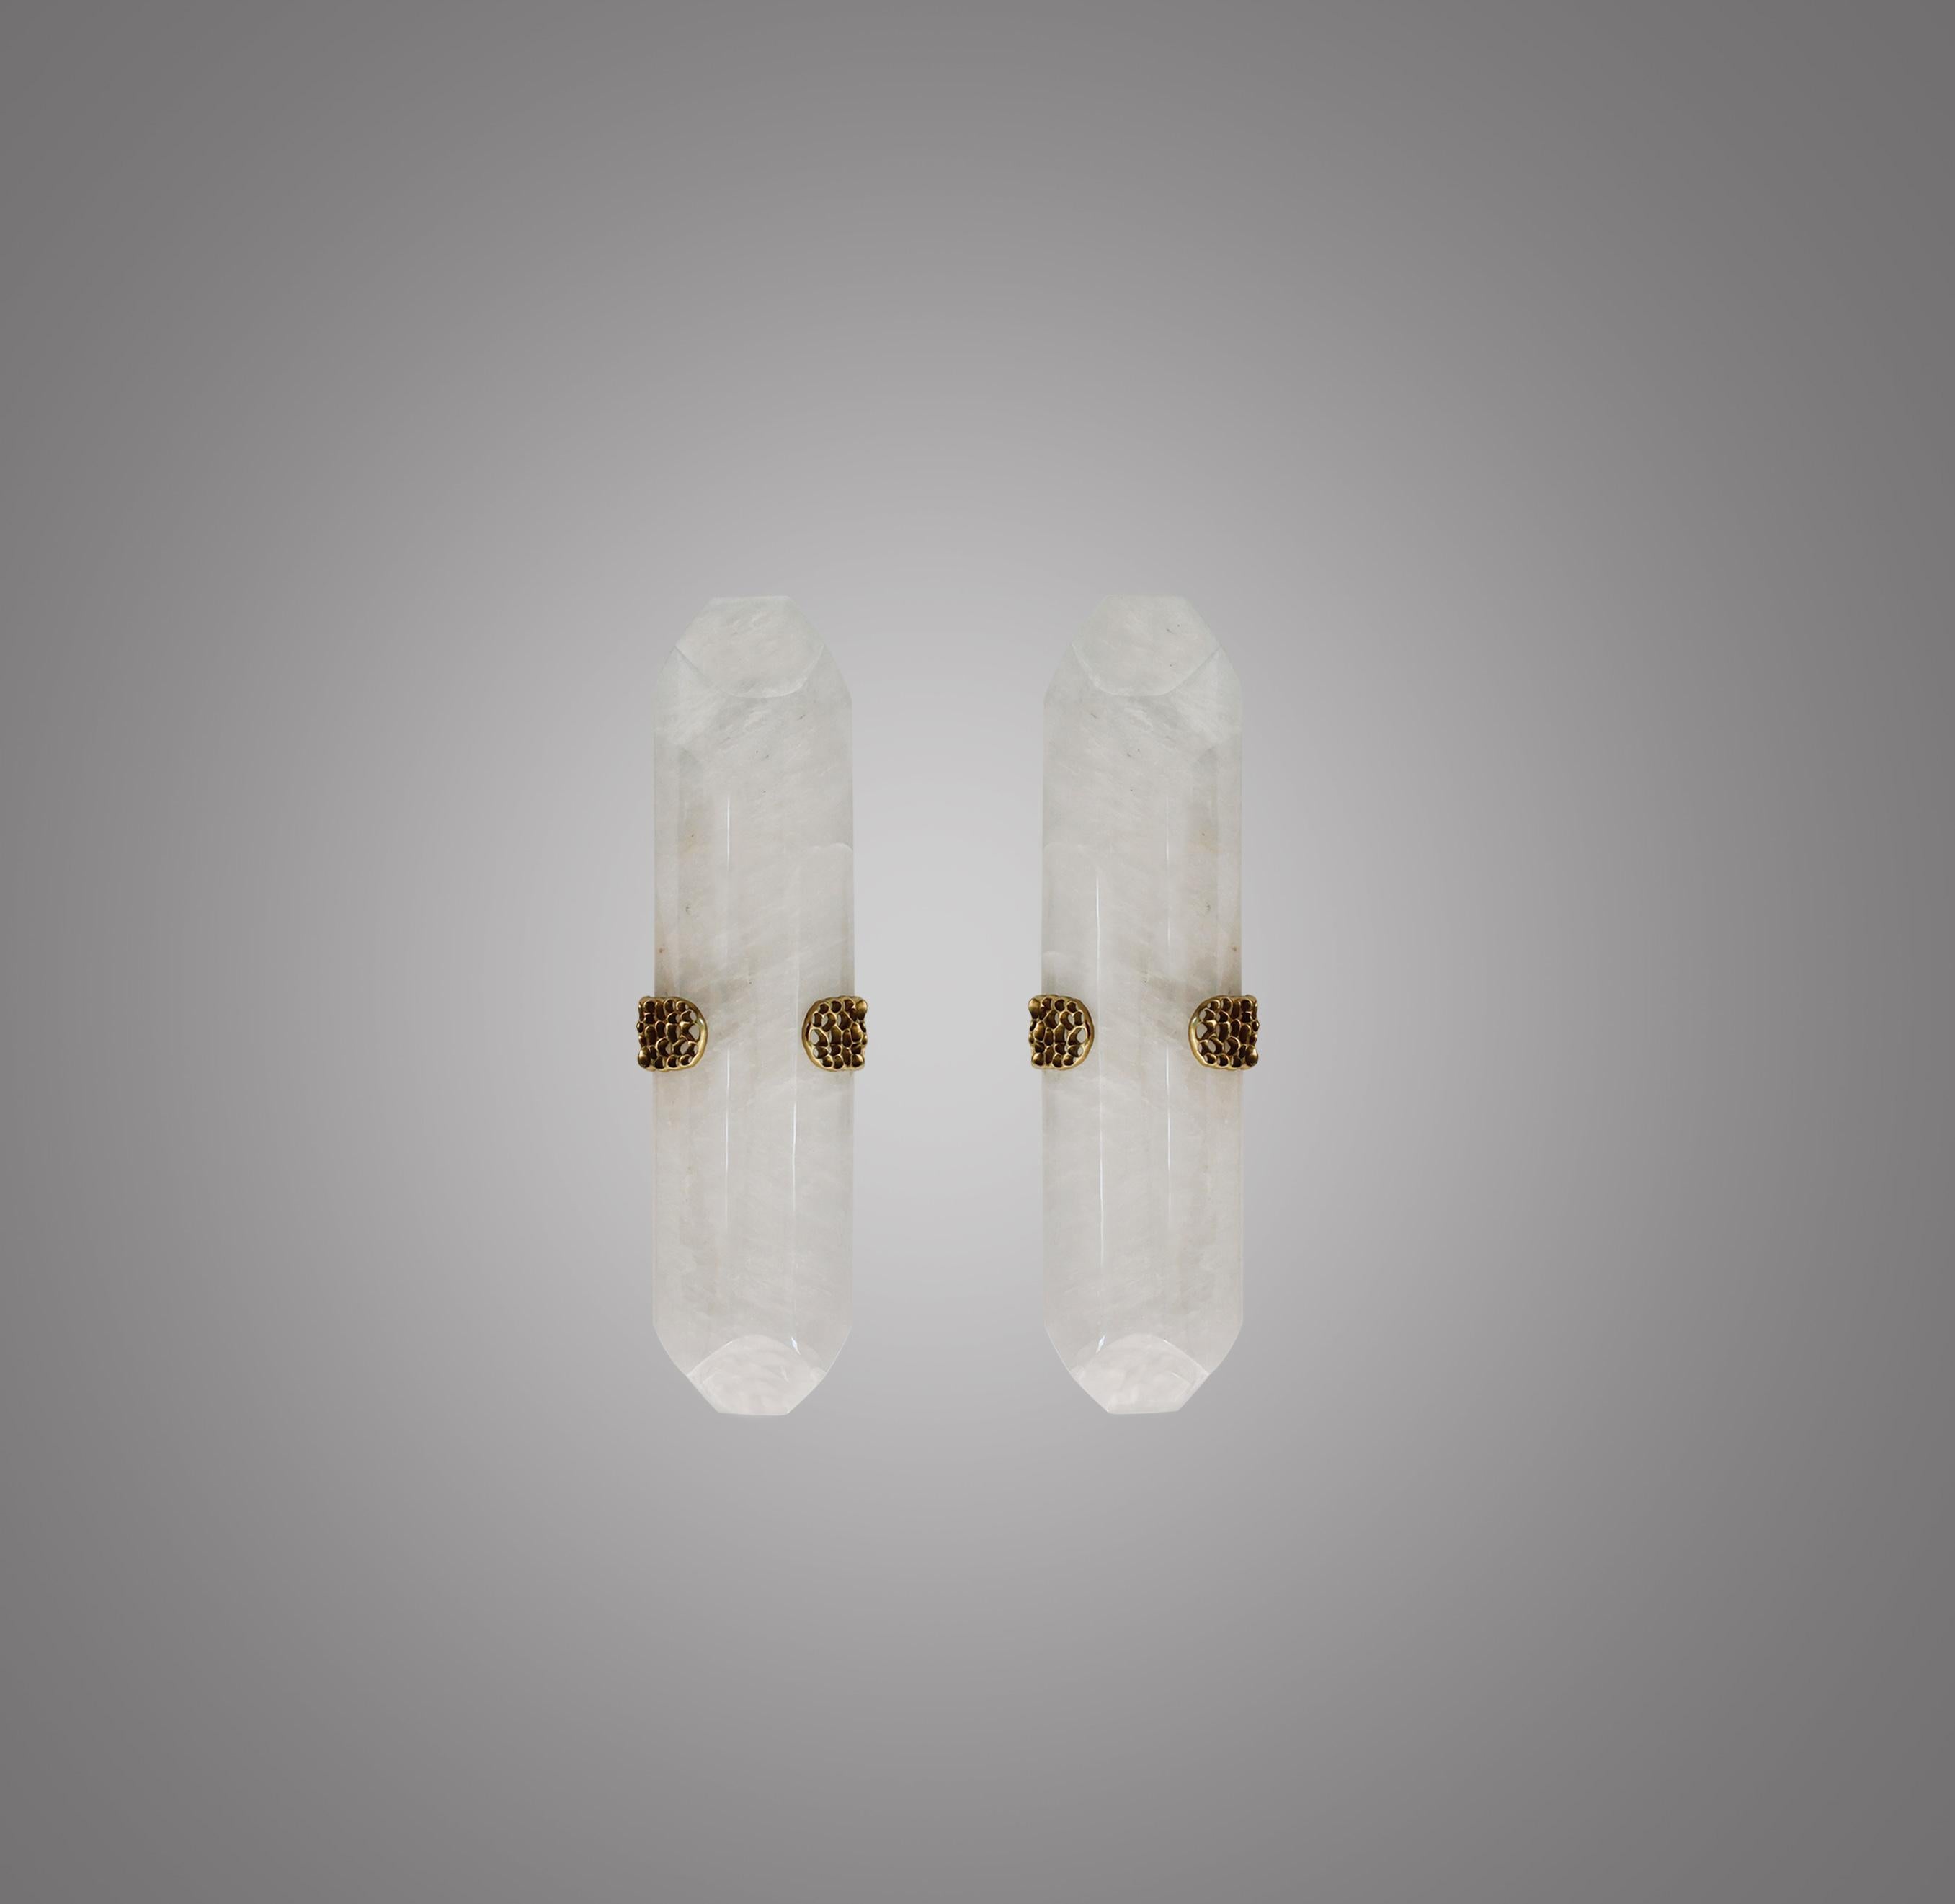 Group of four TDW22 rock crystal sconces with polish brass decoration. Created by Phoenix Gallery, NYC.
Each sconce installs 2 sockets. 120watts max. Led light bulbs supplied.
Custom size and metal finish upon request.